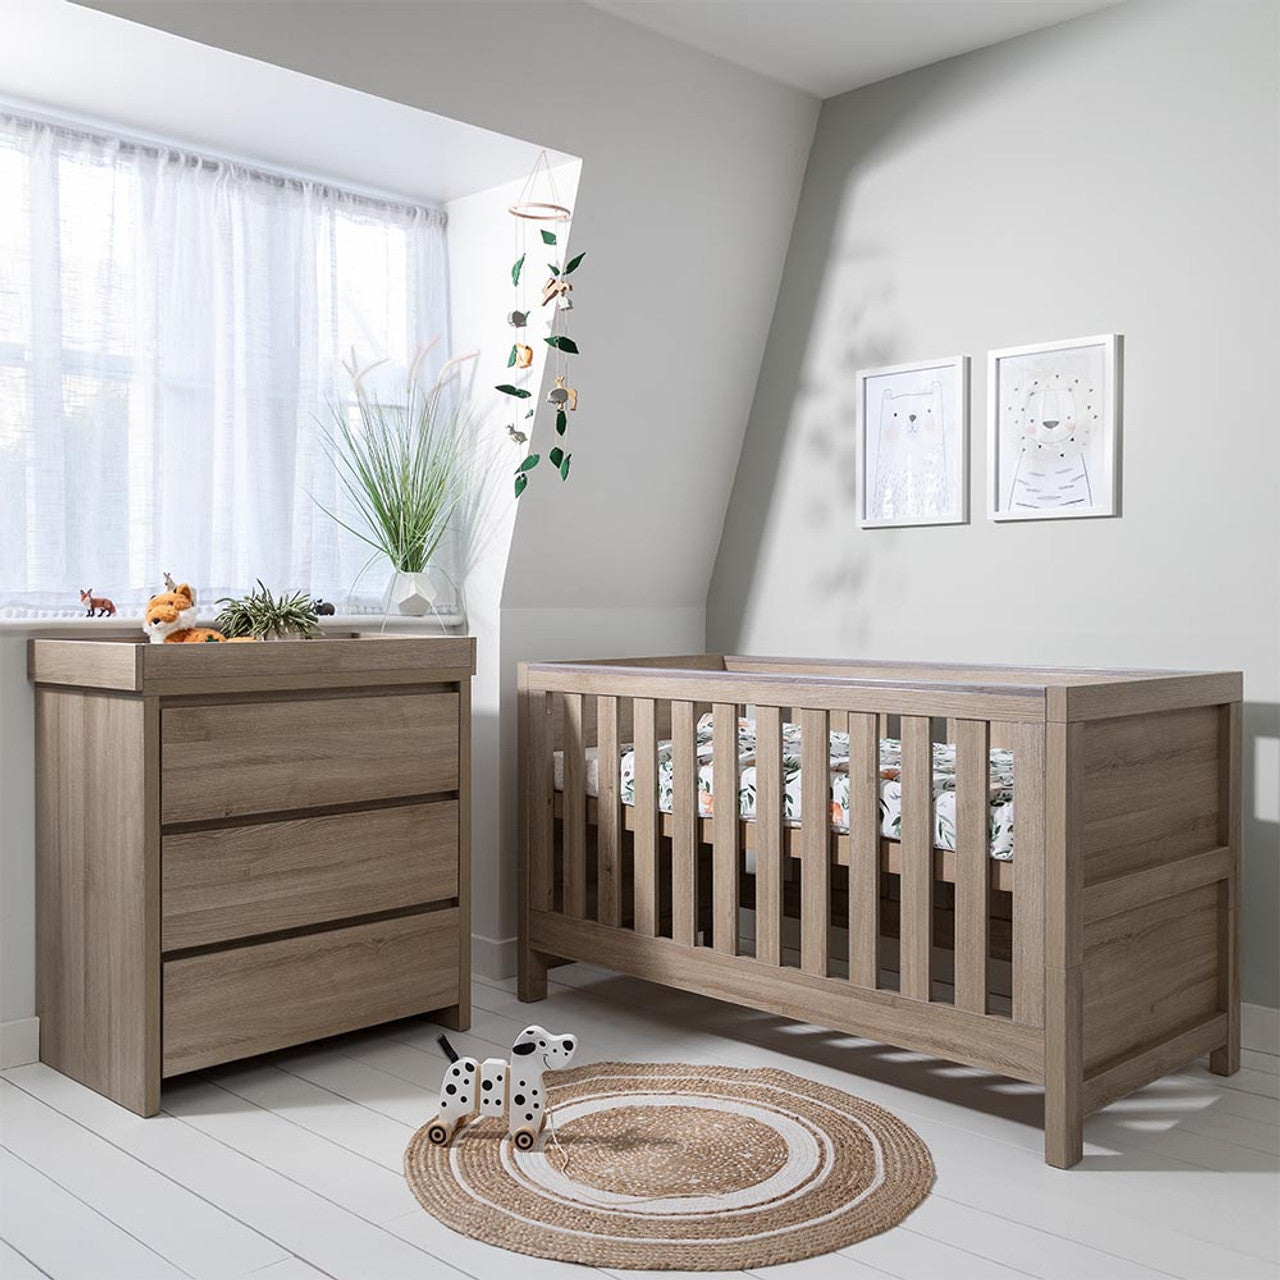 Tutti Bambini Modena 2 Piece Room Set - Oak -  | For Your Little One